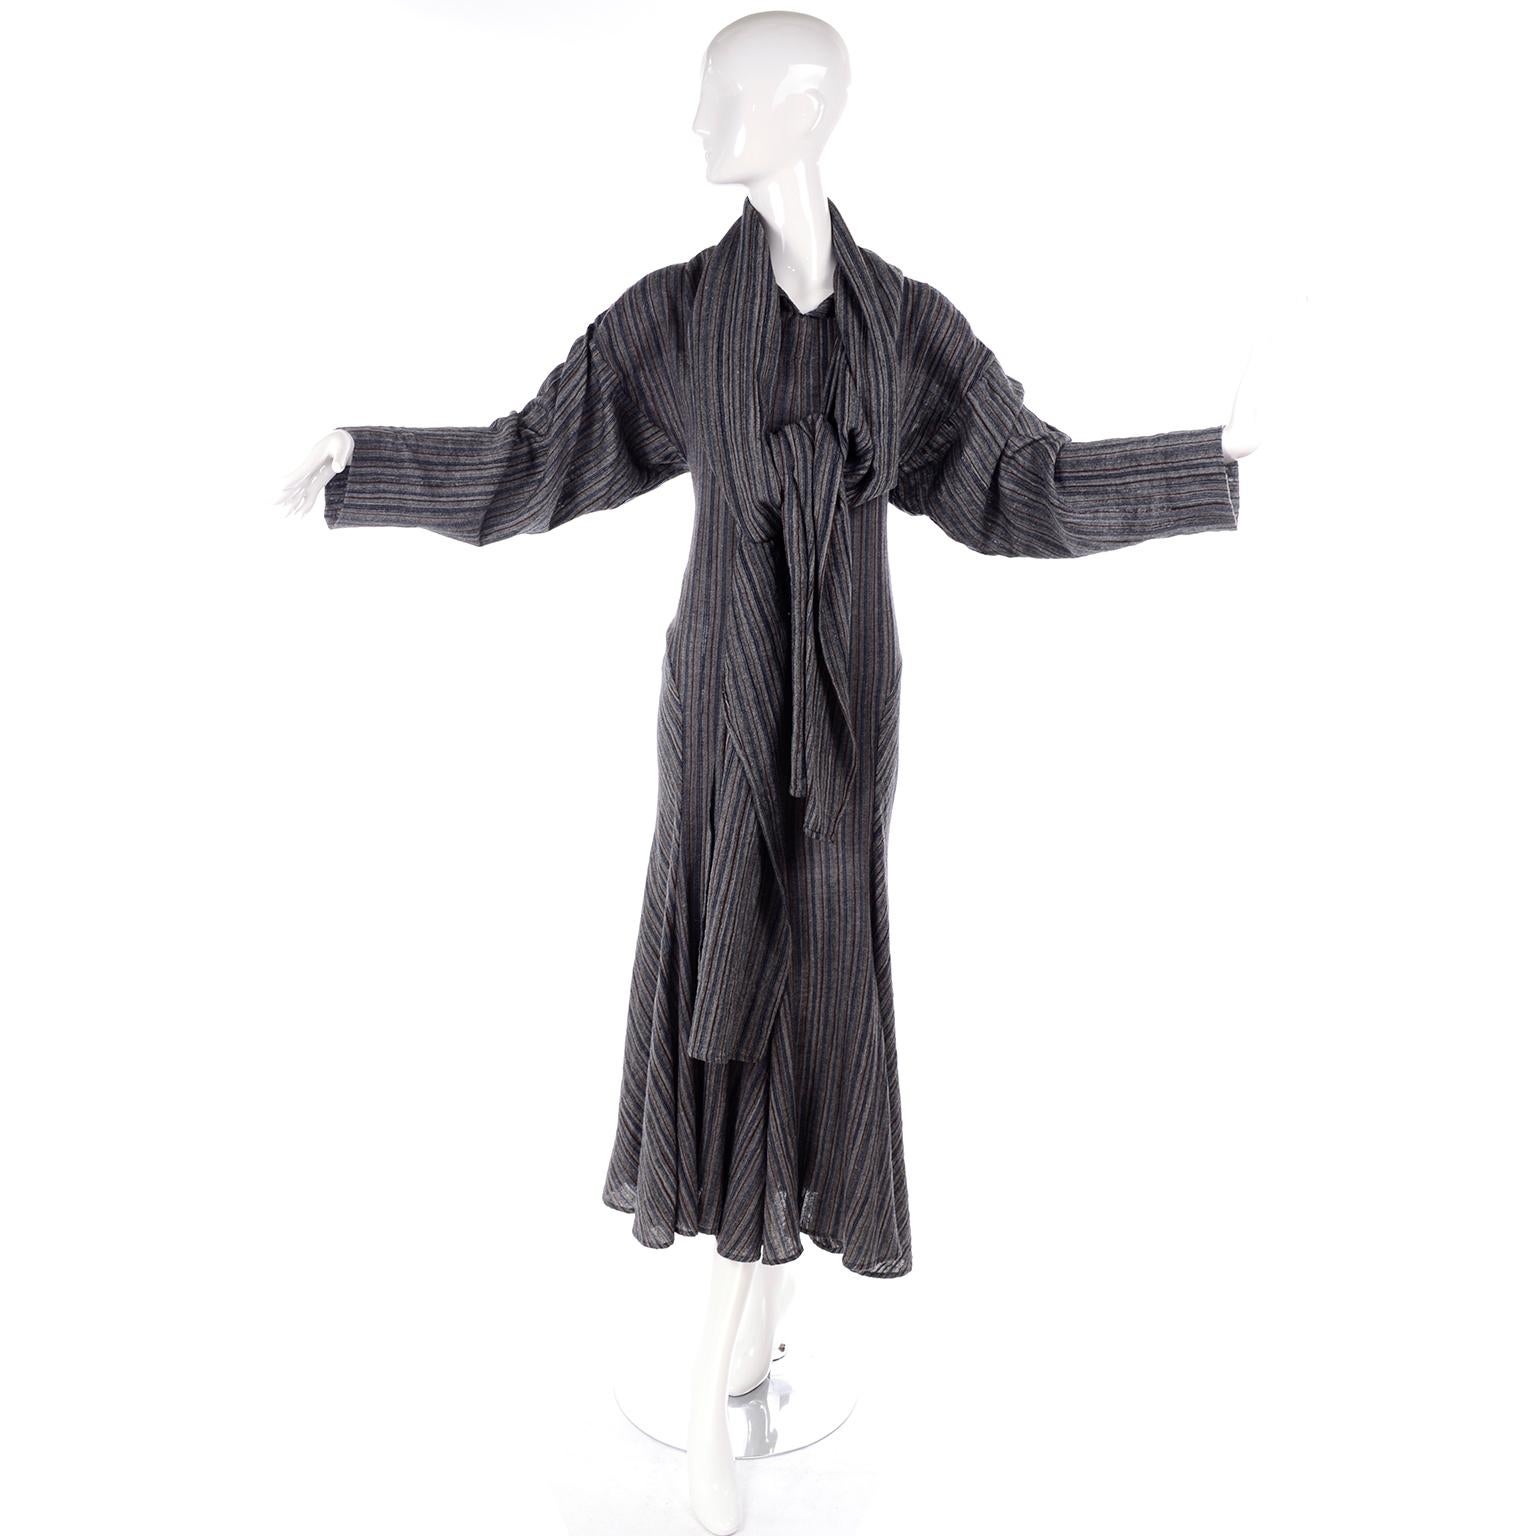 This is a fabulous vintage dress designed by Norma Kamali in the 1980's.  The dress is in a nice gauze like Gray fabric with red and navy blue stripes. This dress comes with a long scarf that can be worn in a number of ways, including as a hood, as